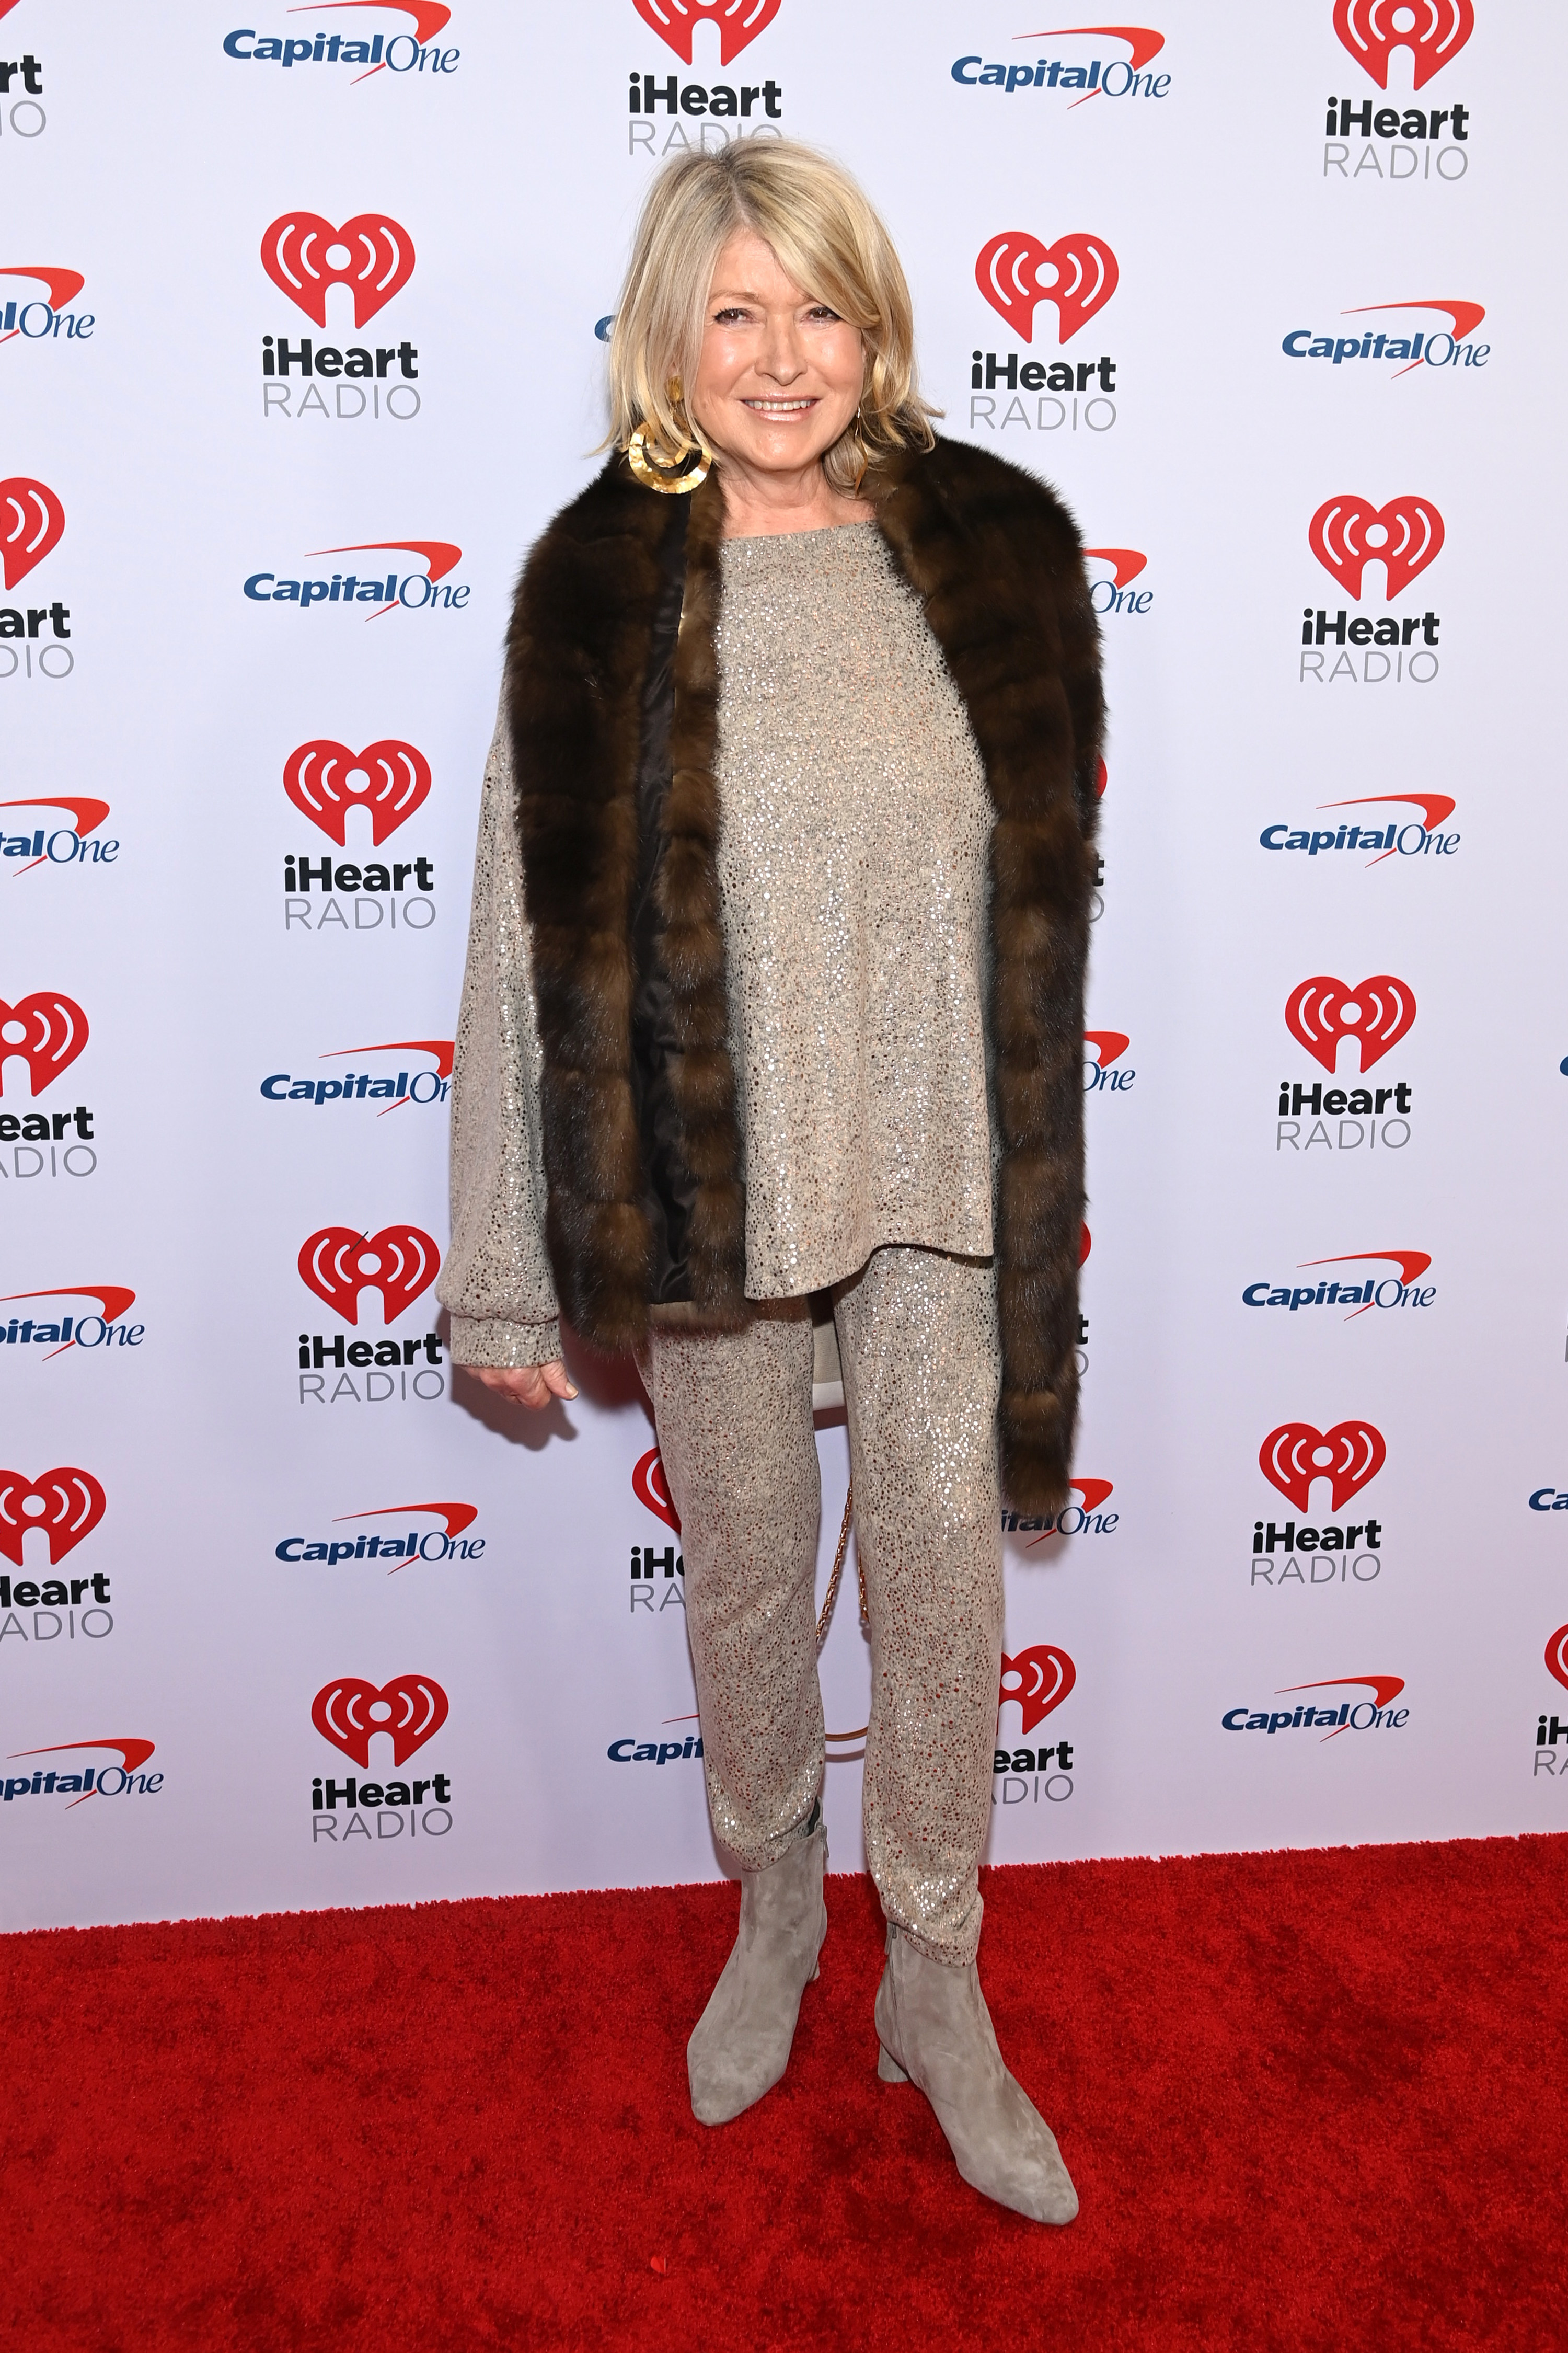 Martha on the red carpet for iHeart Radio